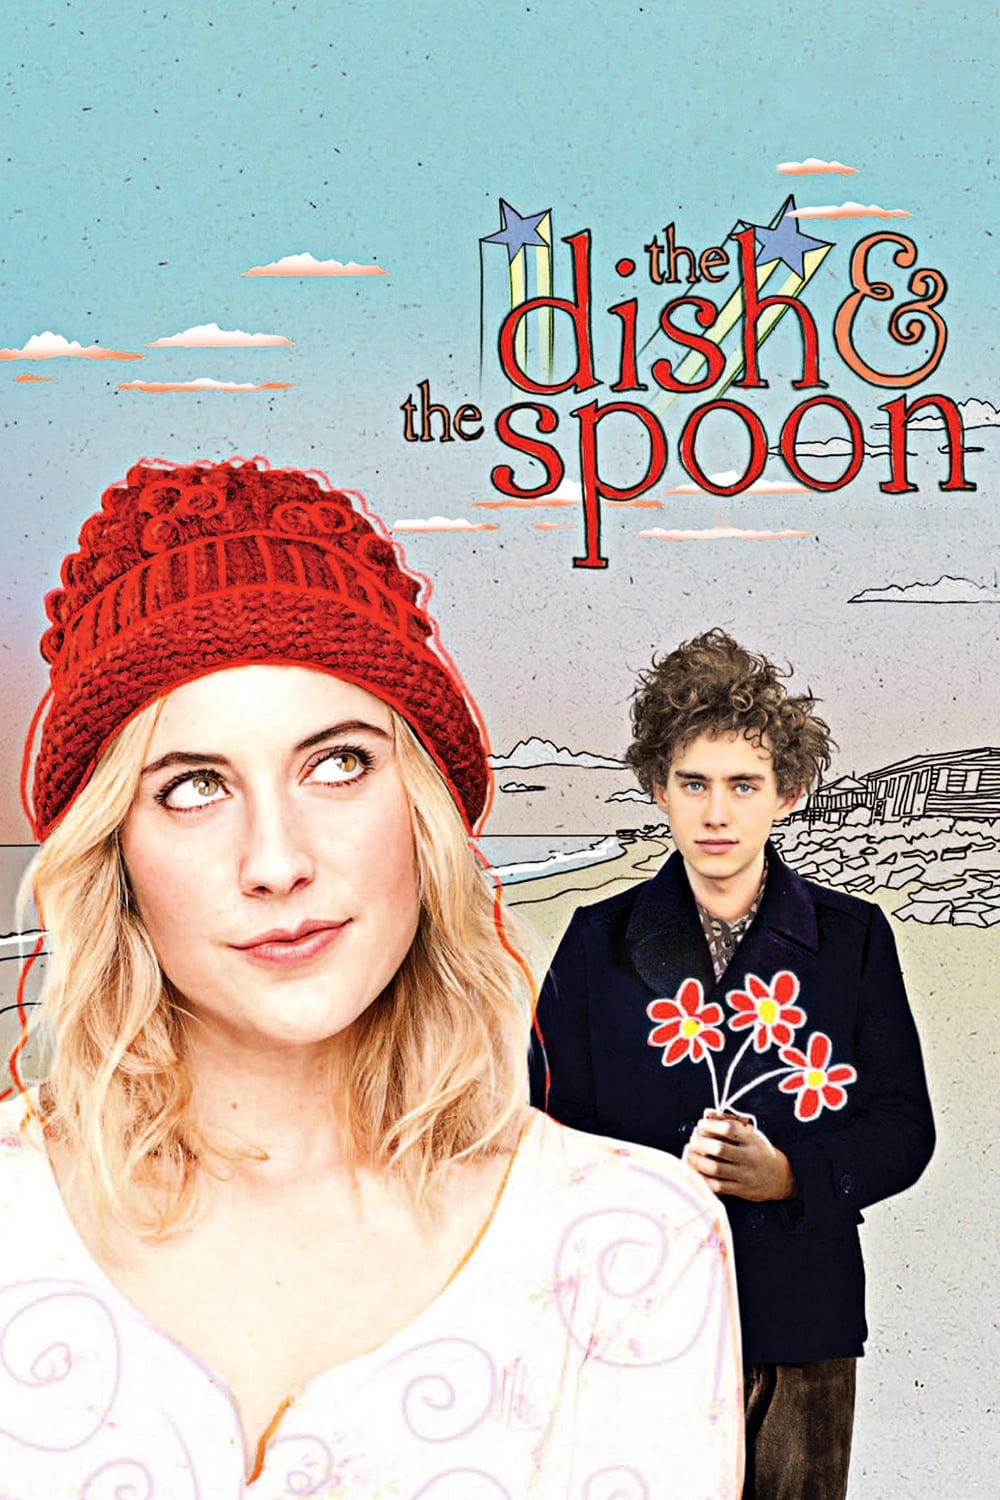 The Dish & the Spoon (2011)